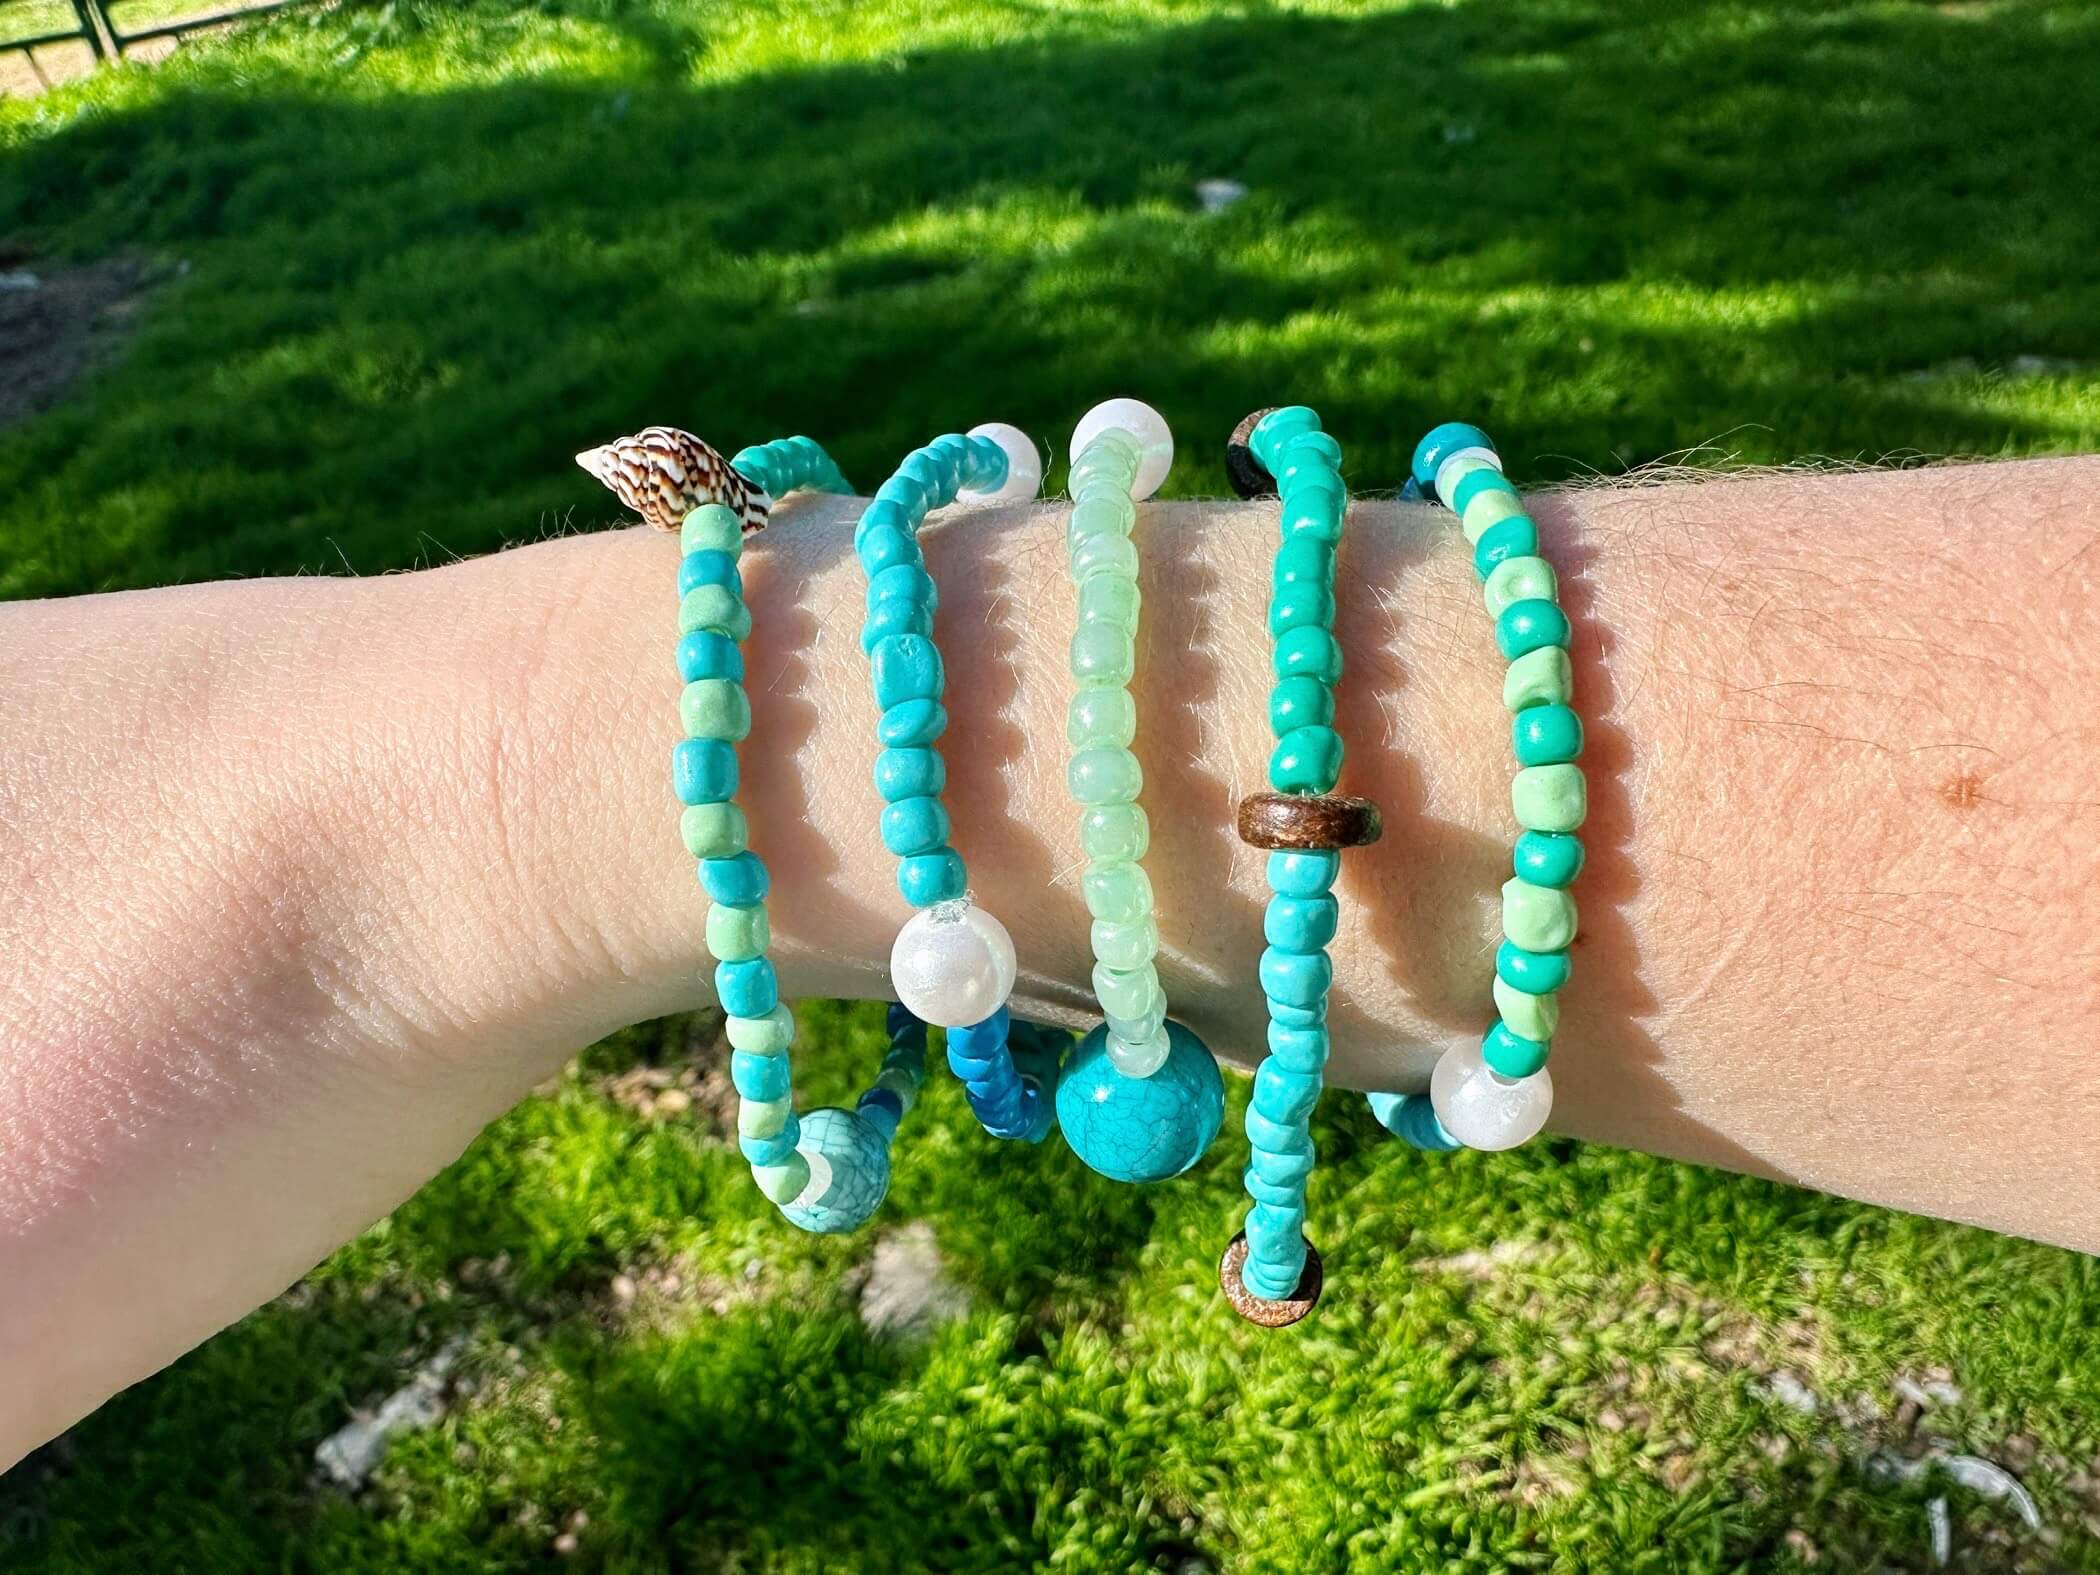 Turquoise bracelets on an outstretched arm